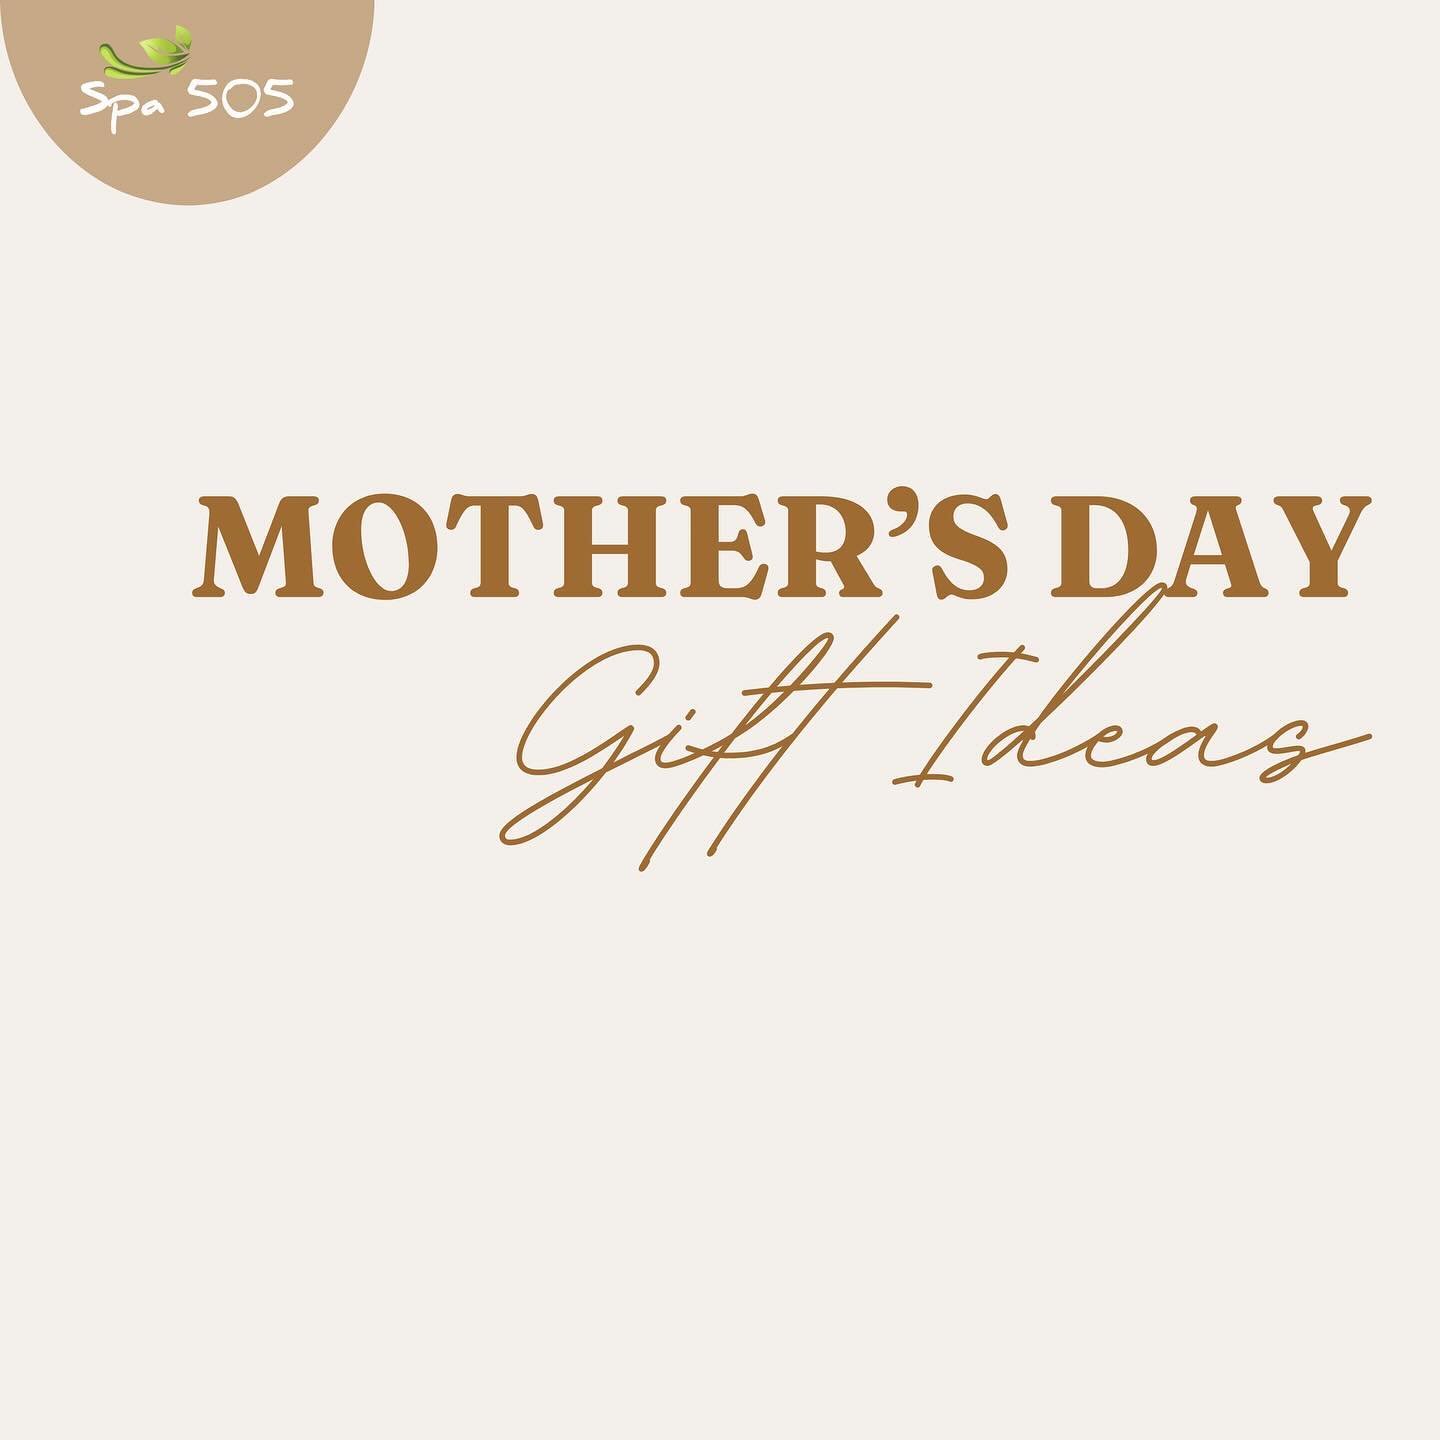 🤍MOTHER'S DAY GIFT IDEAS

If you're wondering what should you gift your Mom, then consider these treatment as a health gift for your Mom to enjoy and relax!

🍃Scalp Care Treatment: The ultimate relaxation and rejuvenation with our scalp care treatm